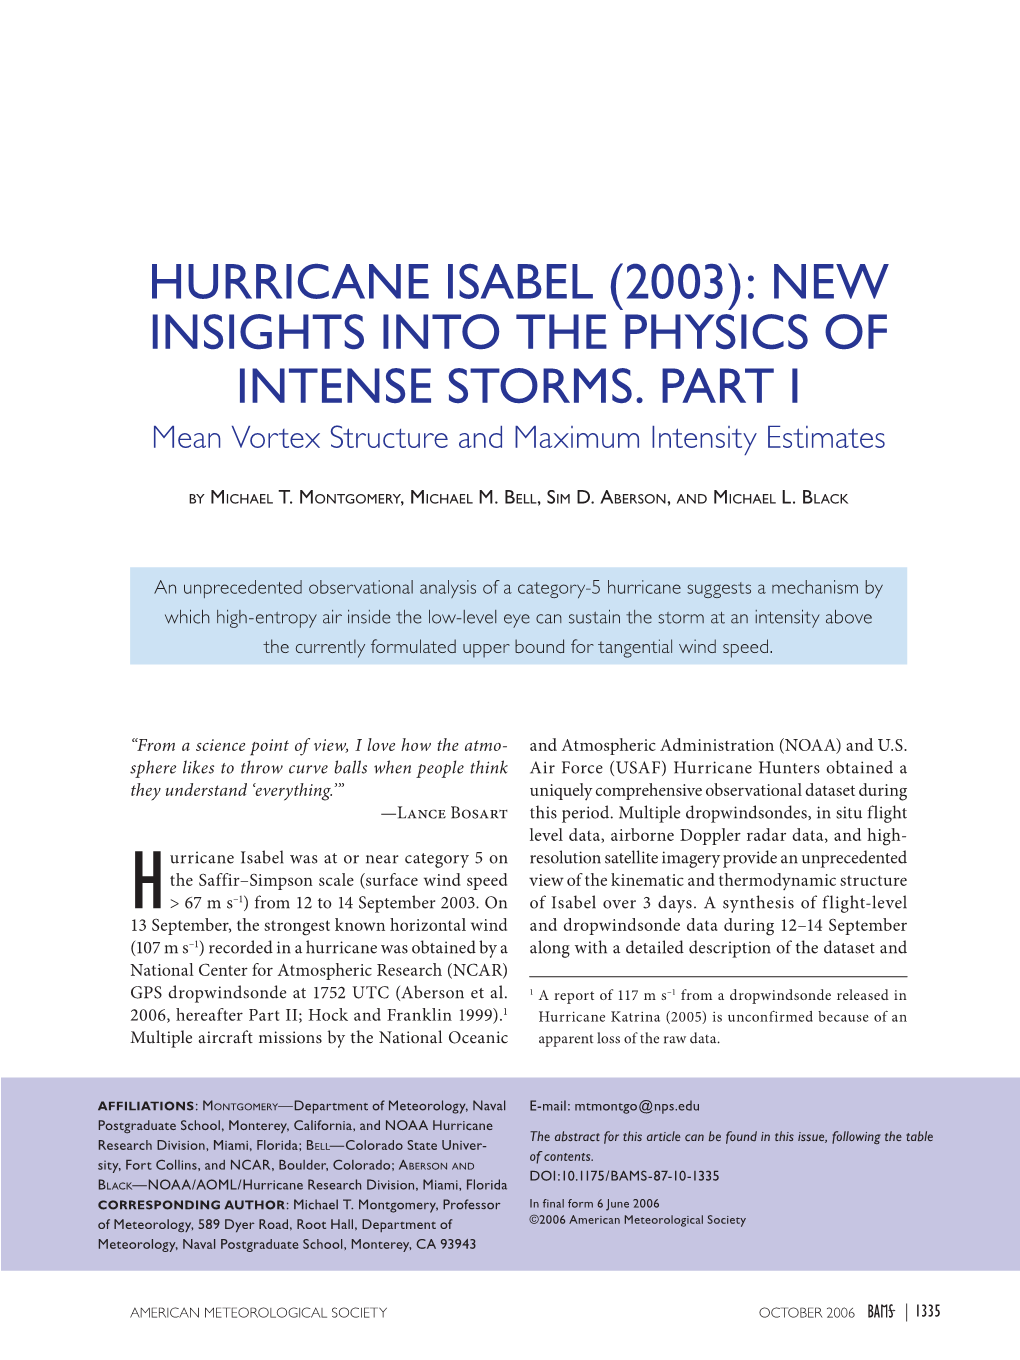 Hurricane Isabel (2003): New Insights Into the Physics of Intense Storms